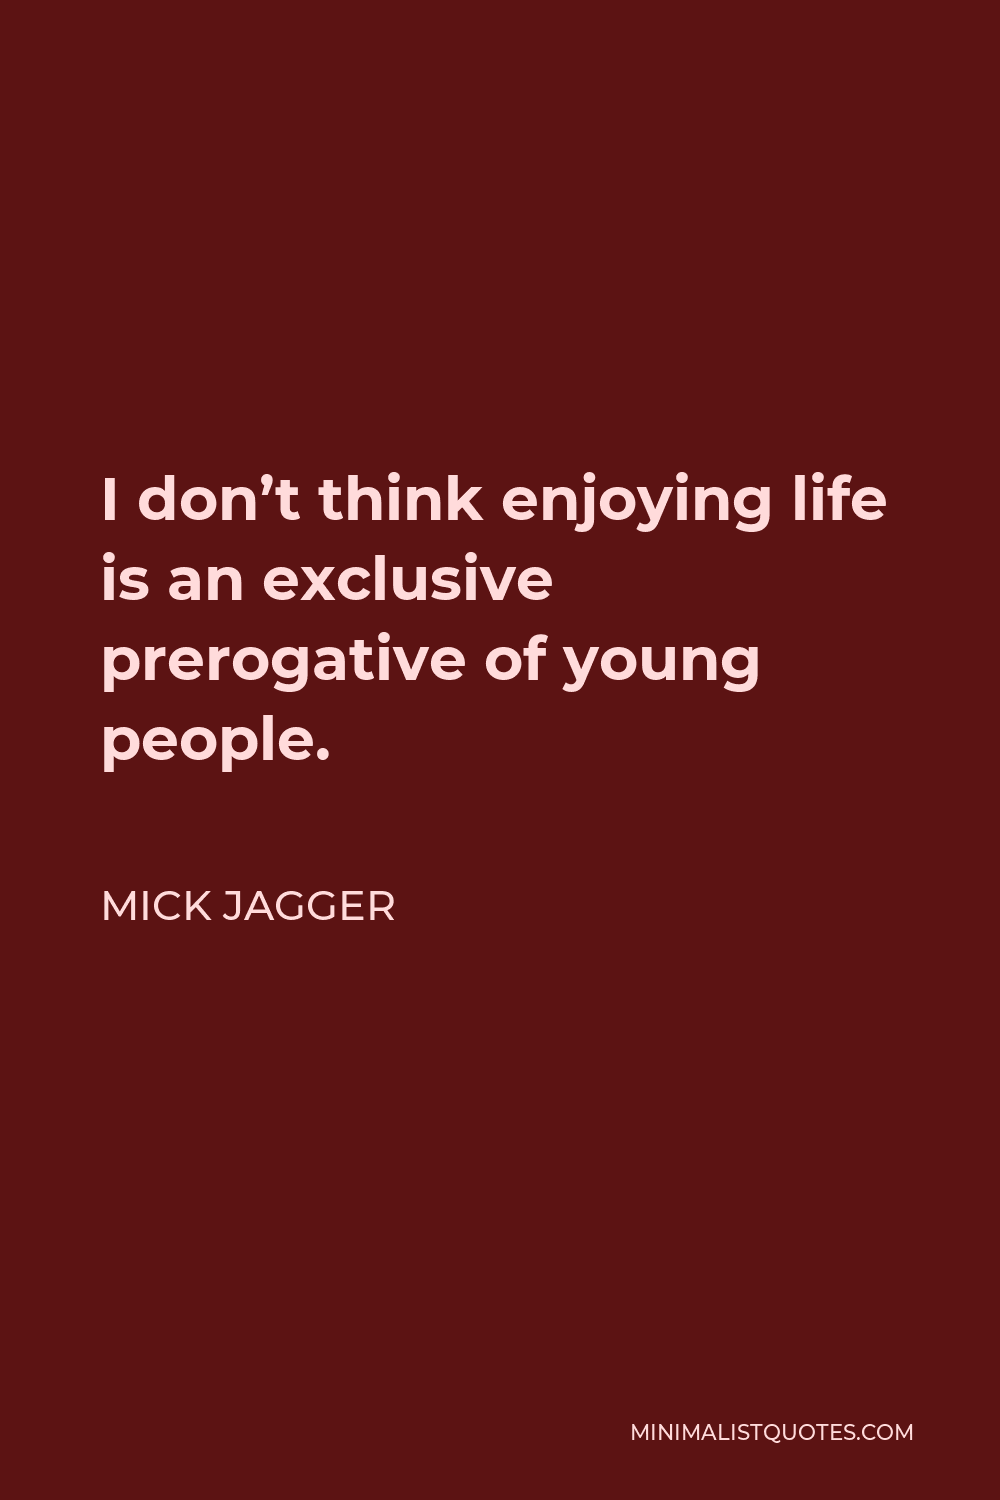 Mick Jagger Quote - I don’t think enjoying life is an exclusive prerogative of young people.